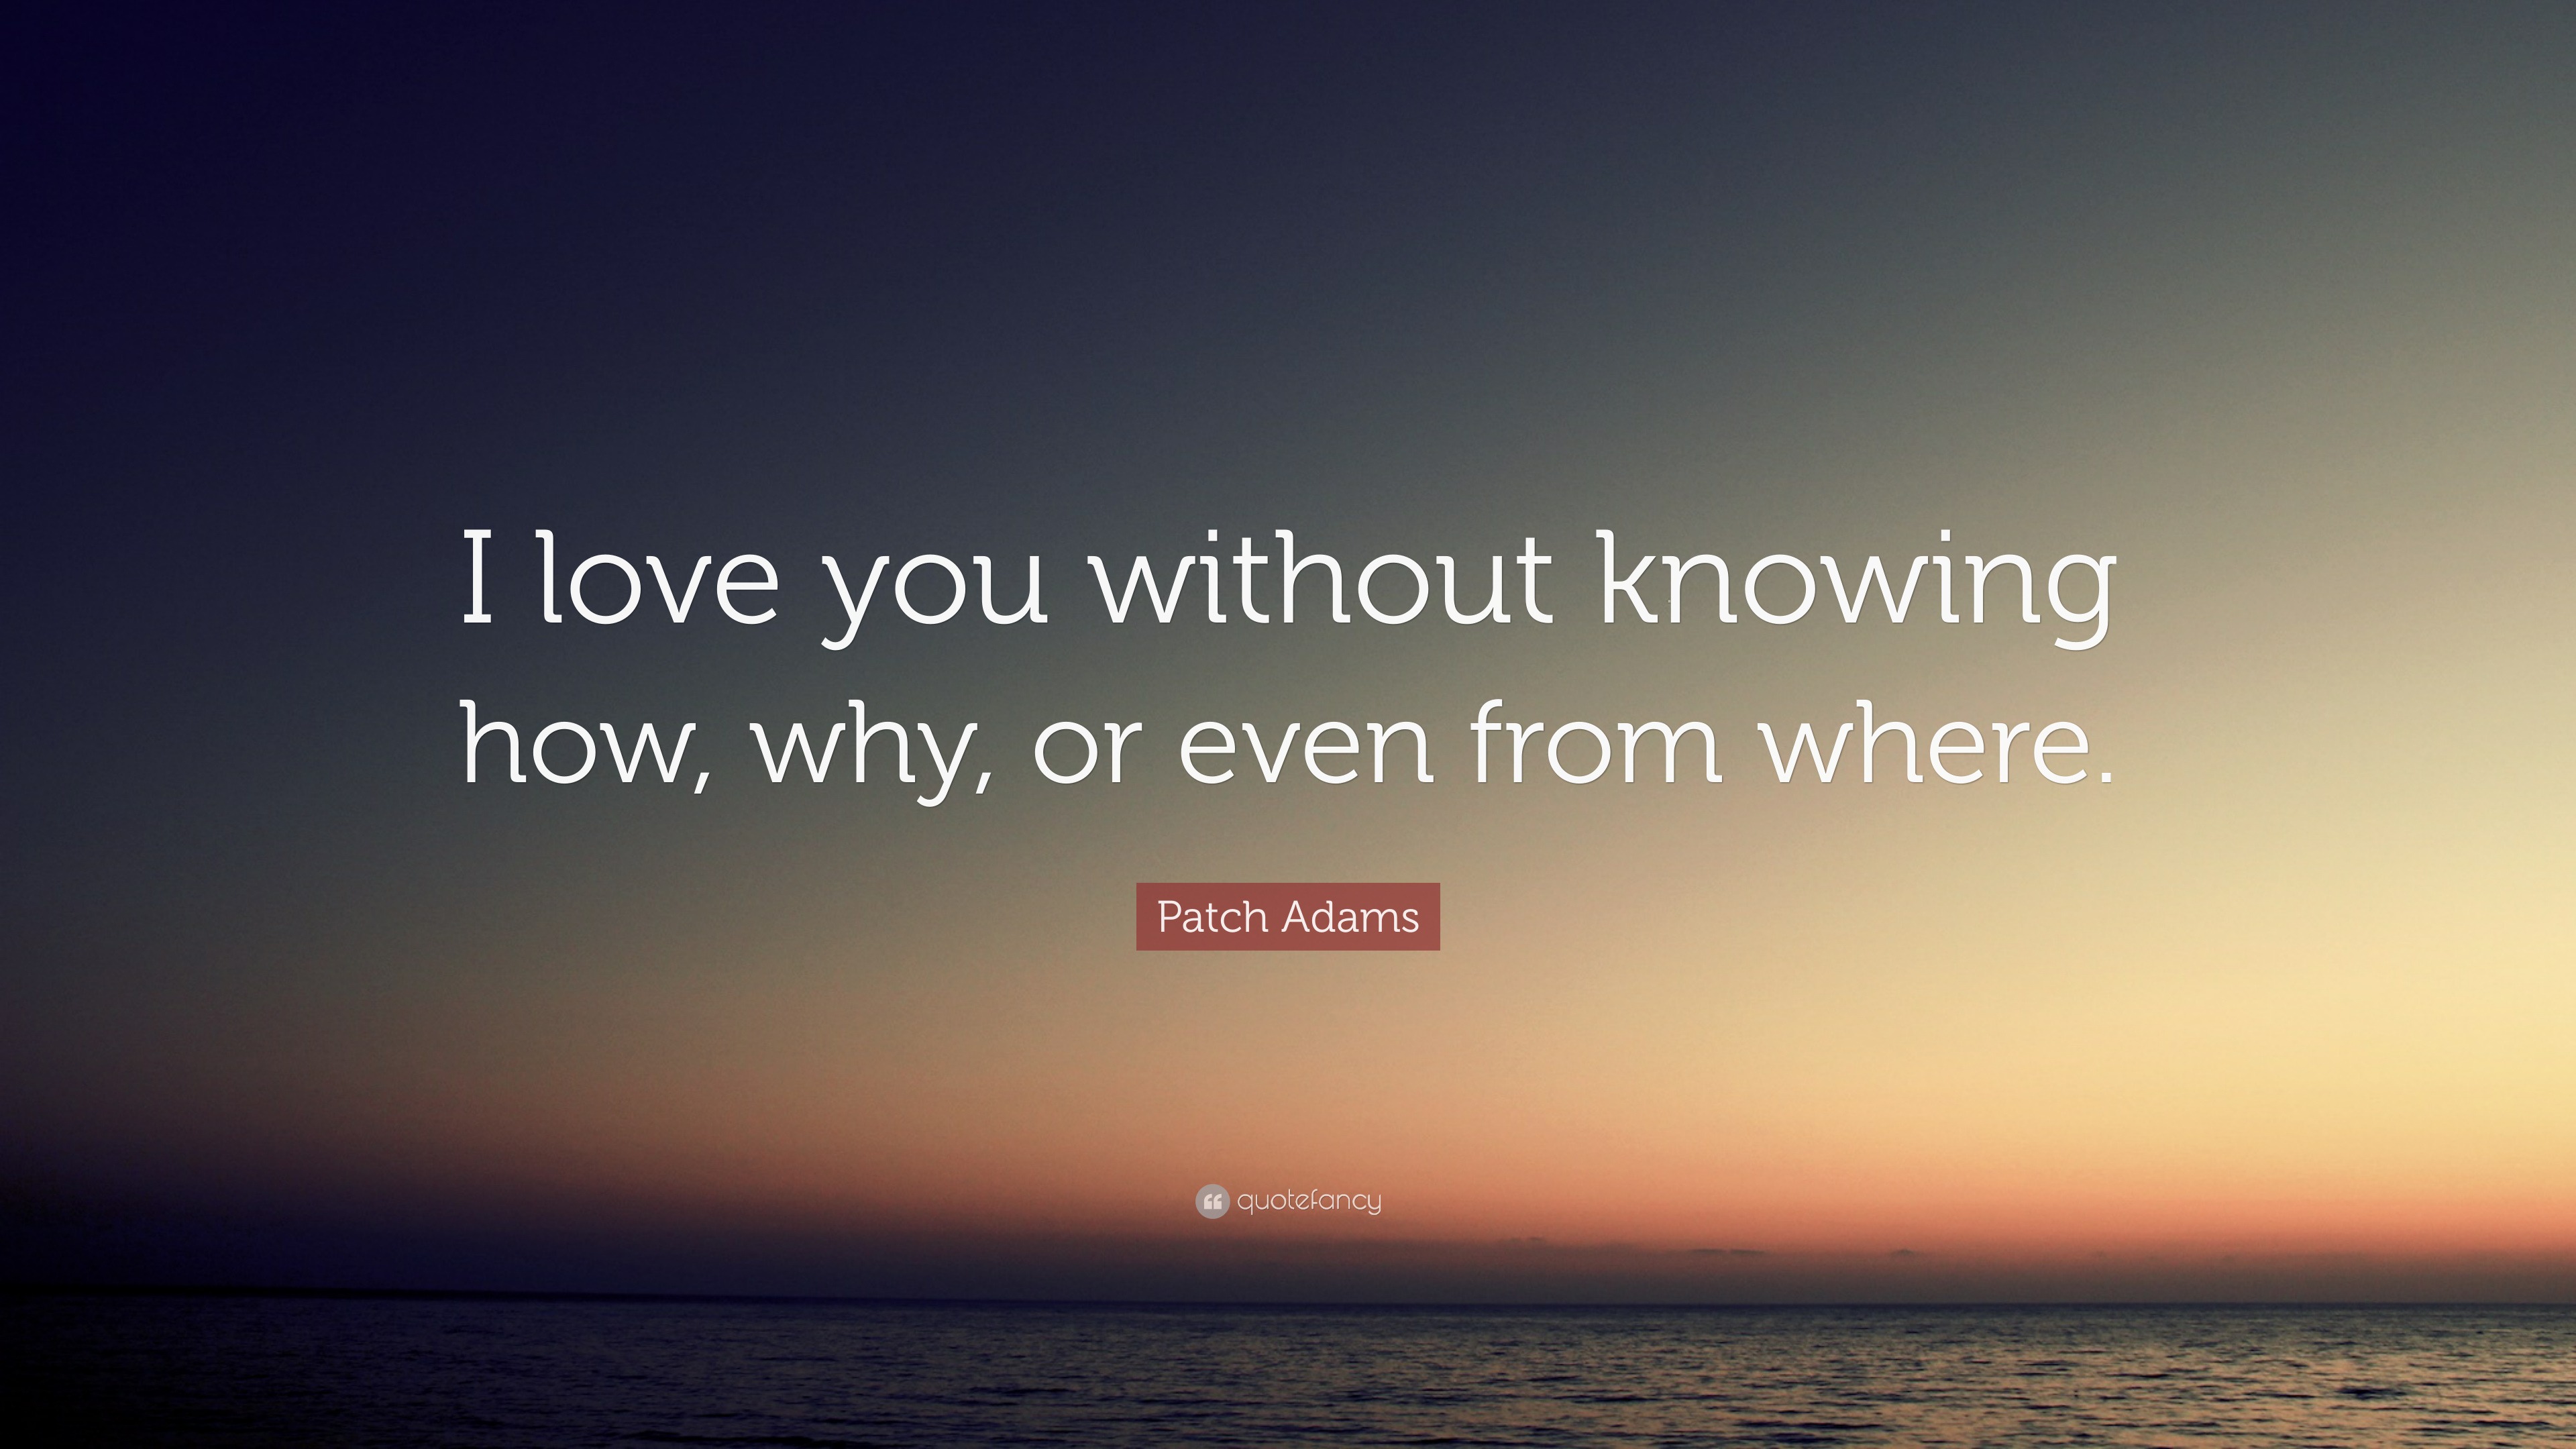 Patch Adams Quote “i Love You Without Knowing How Why Or Even From